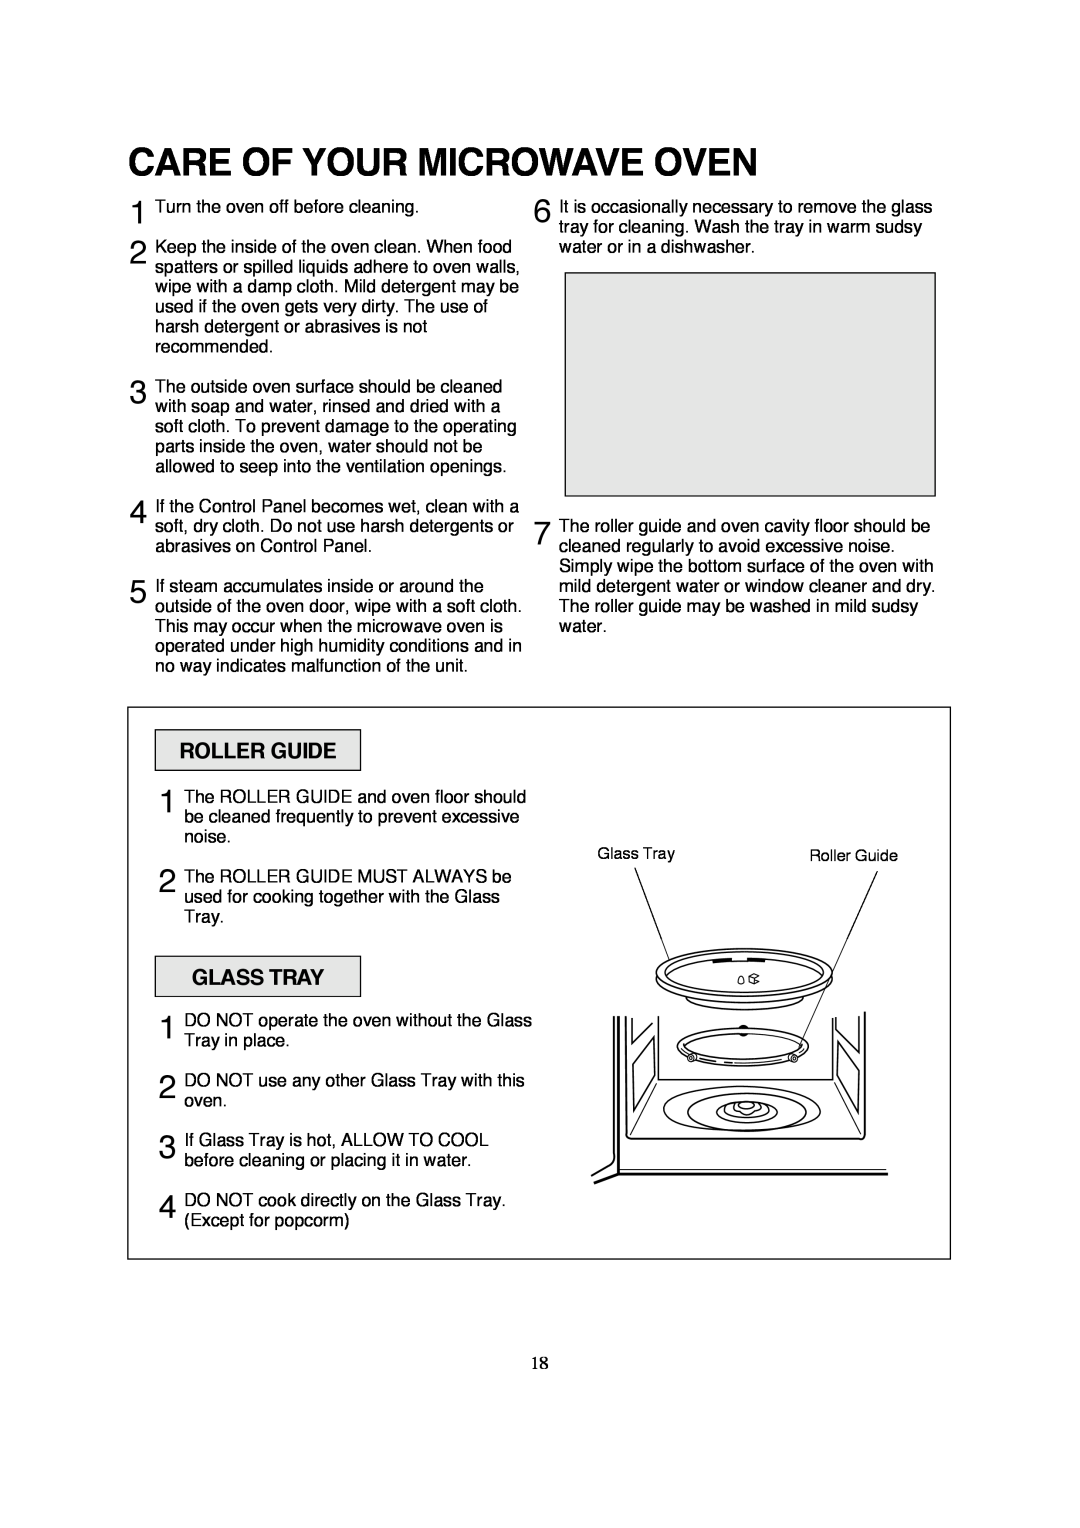 Magic Chef MCD990ARW, MCD990ARB instruction manual Care Of Your Microwave Oven, Roller Guide, Glass Tray 